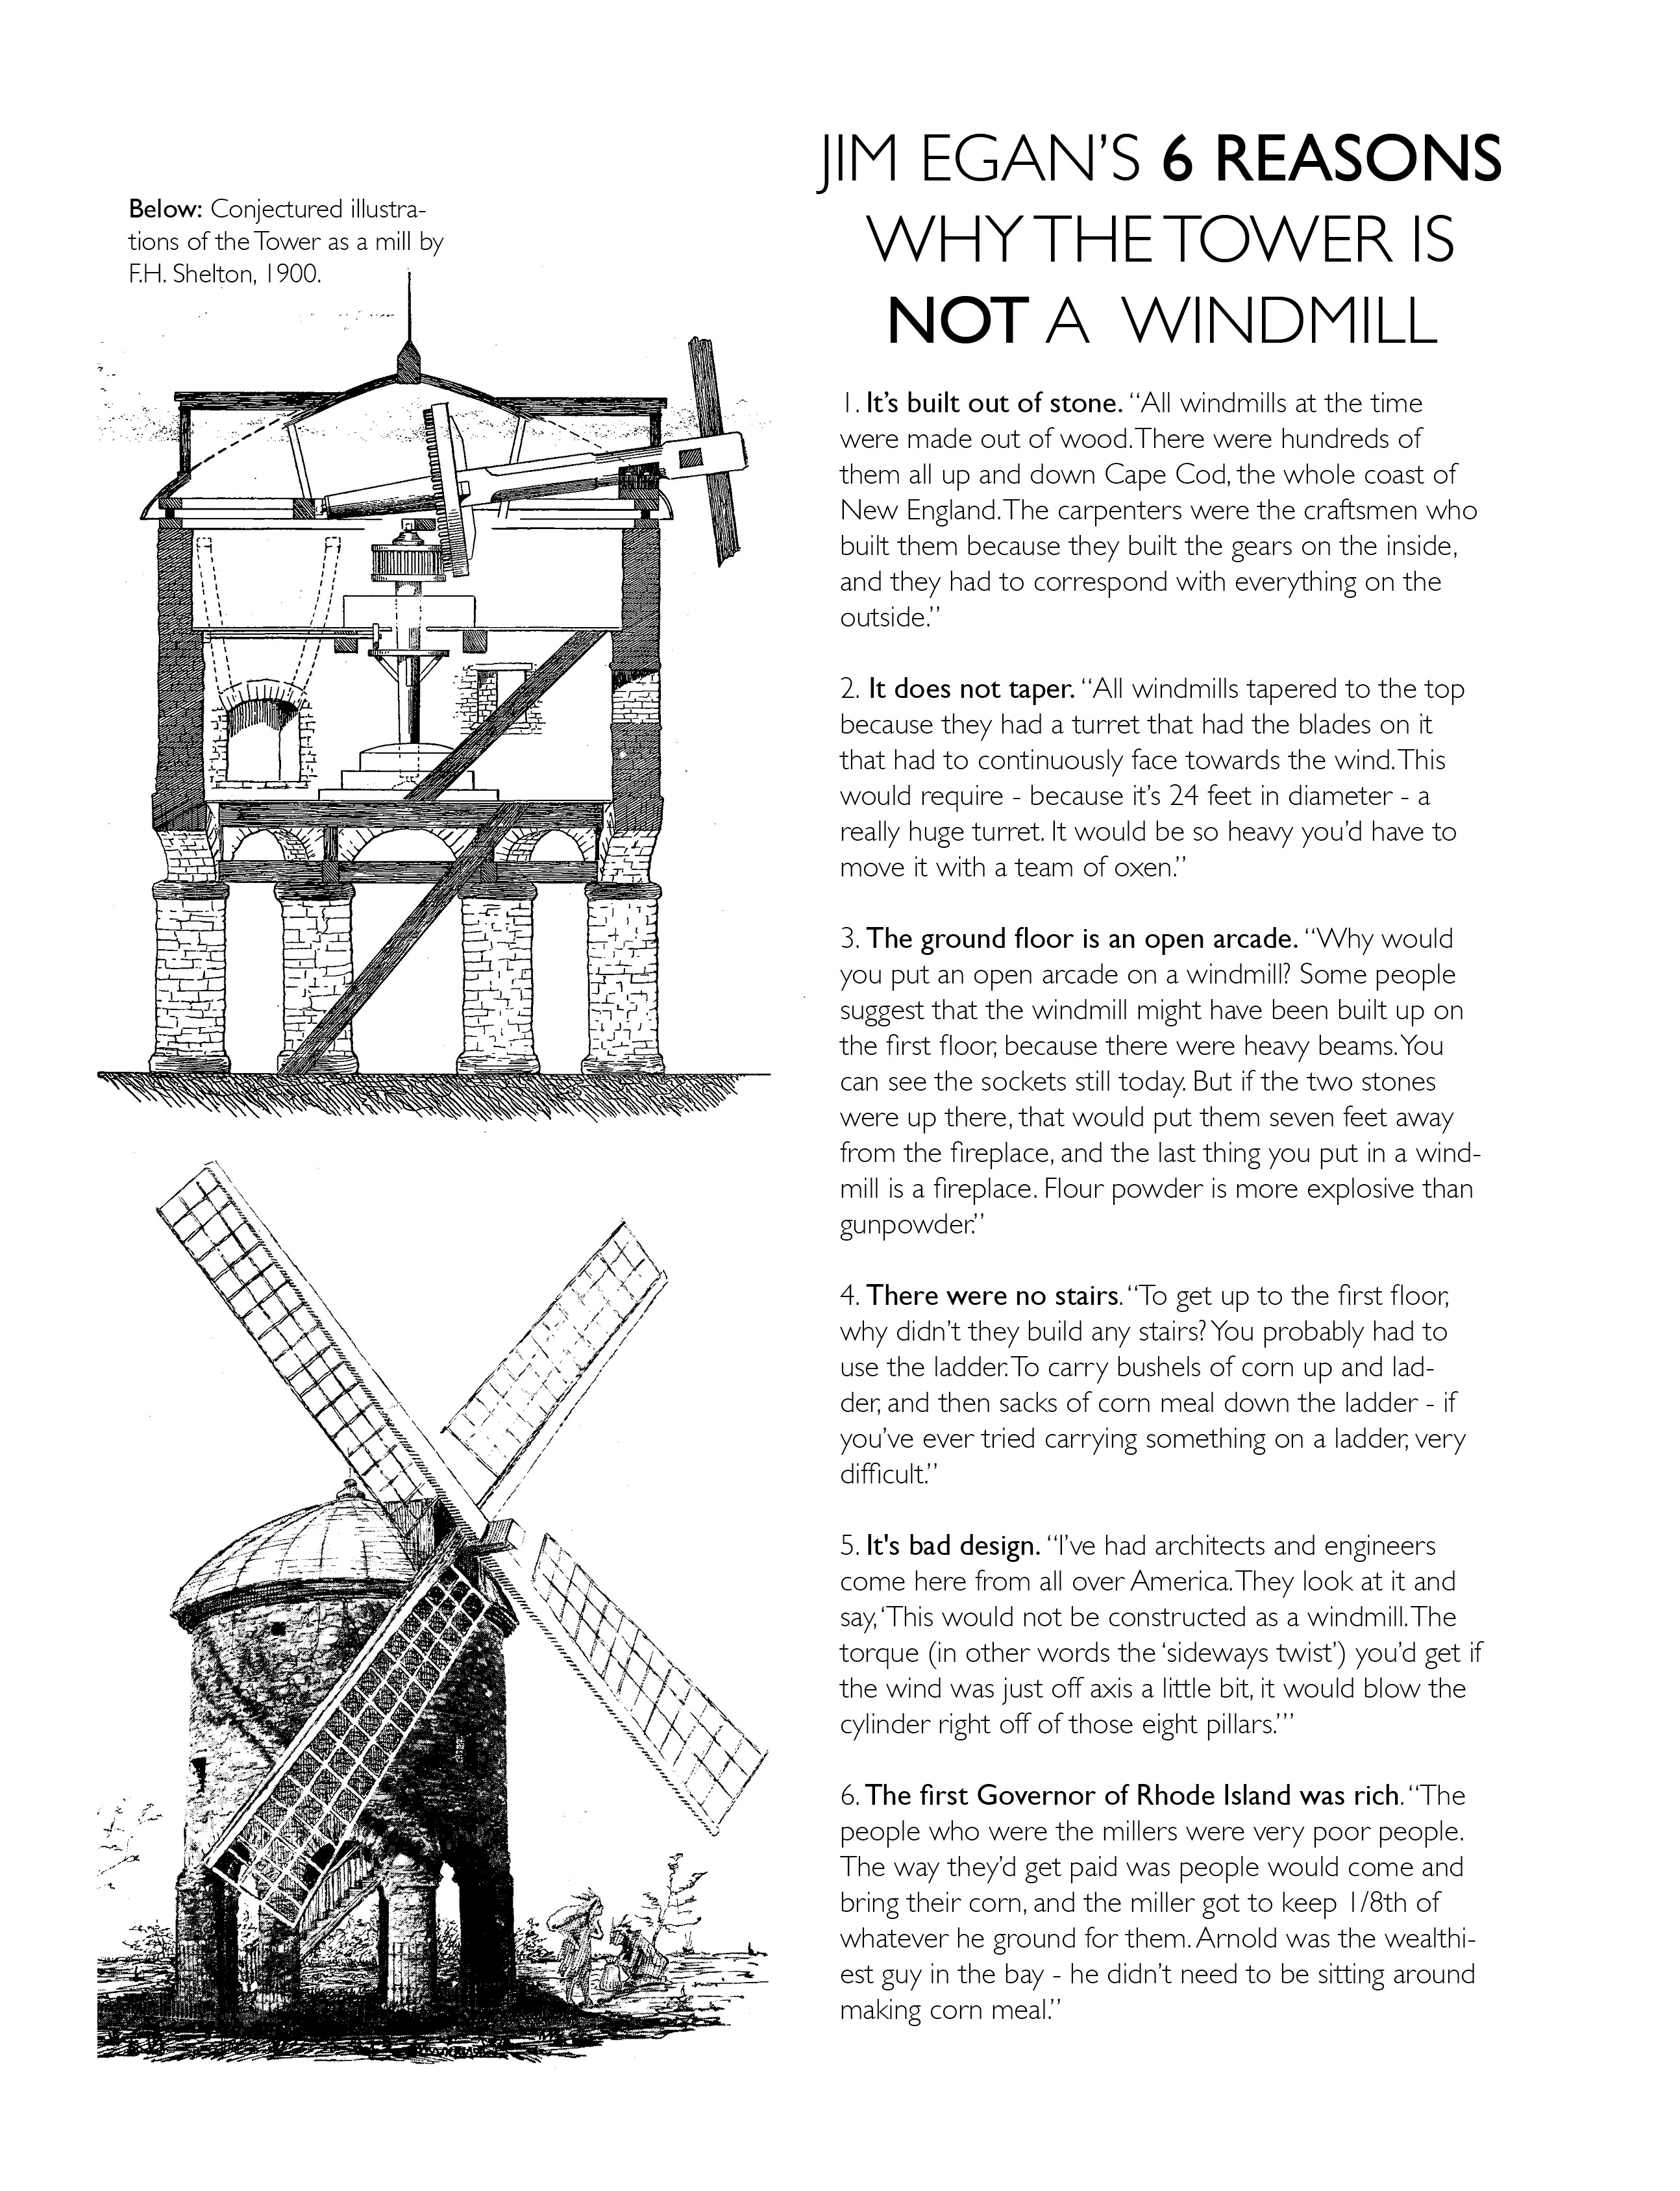 6 Reasons Why the Tower is Not a Windmill